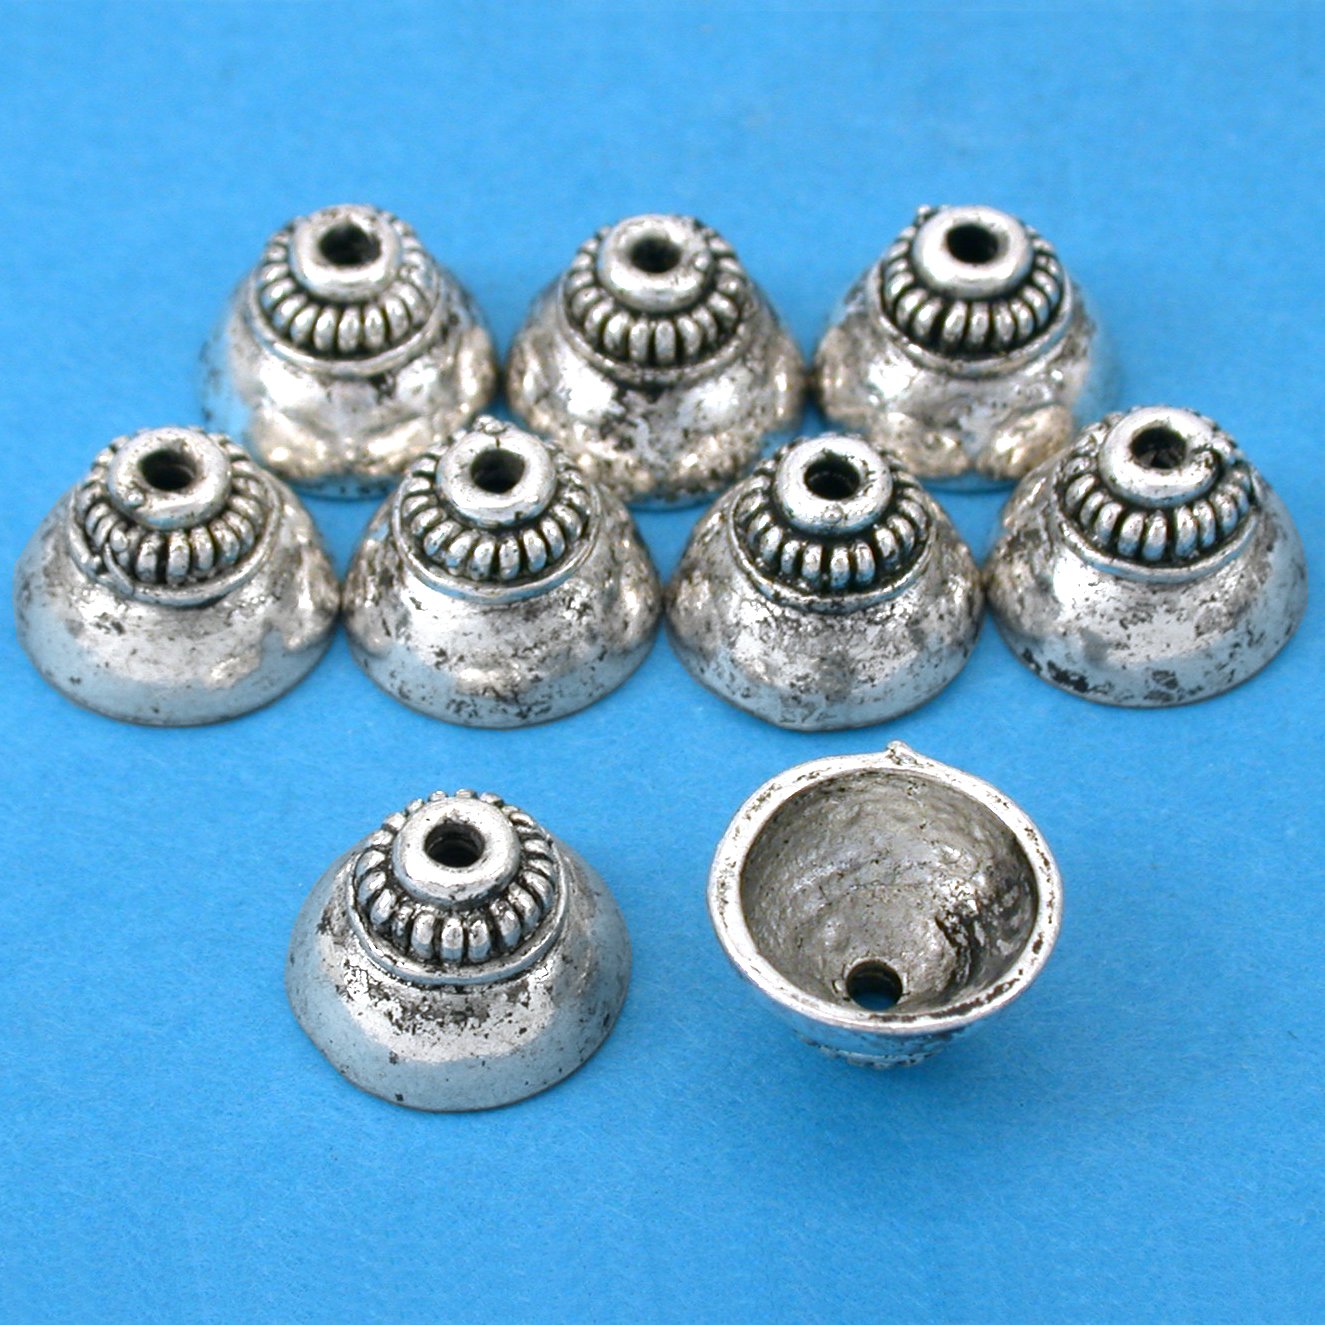 Bali Bead Caps Antique Silver Plated 12.5mm 16 Grams 8Pcs Approx.